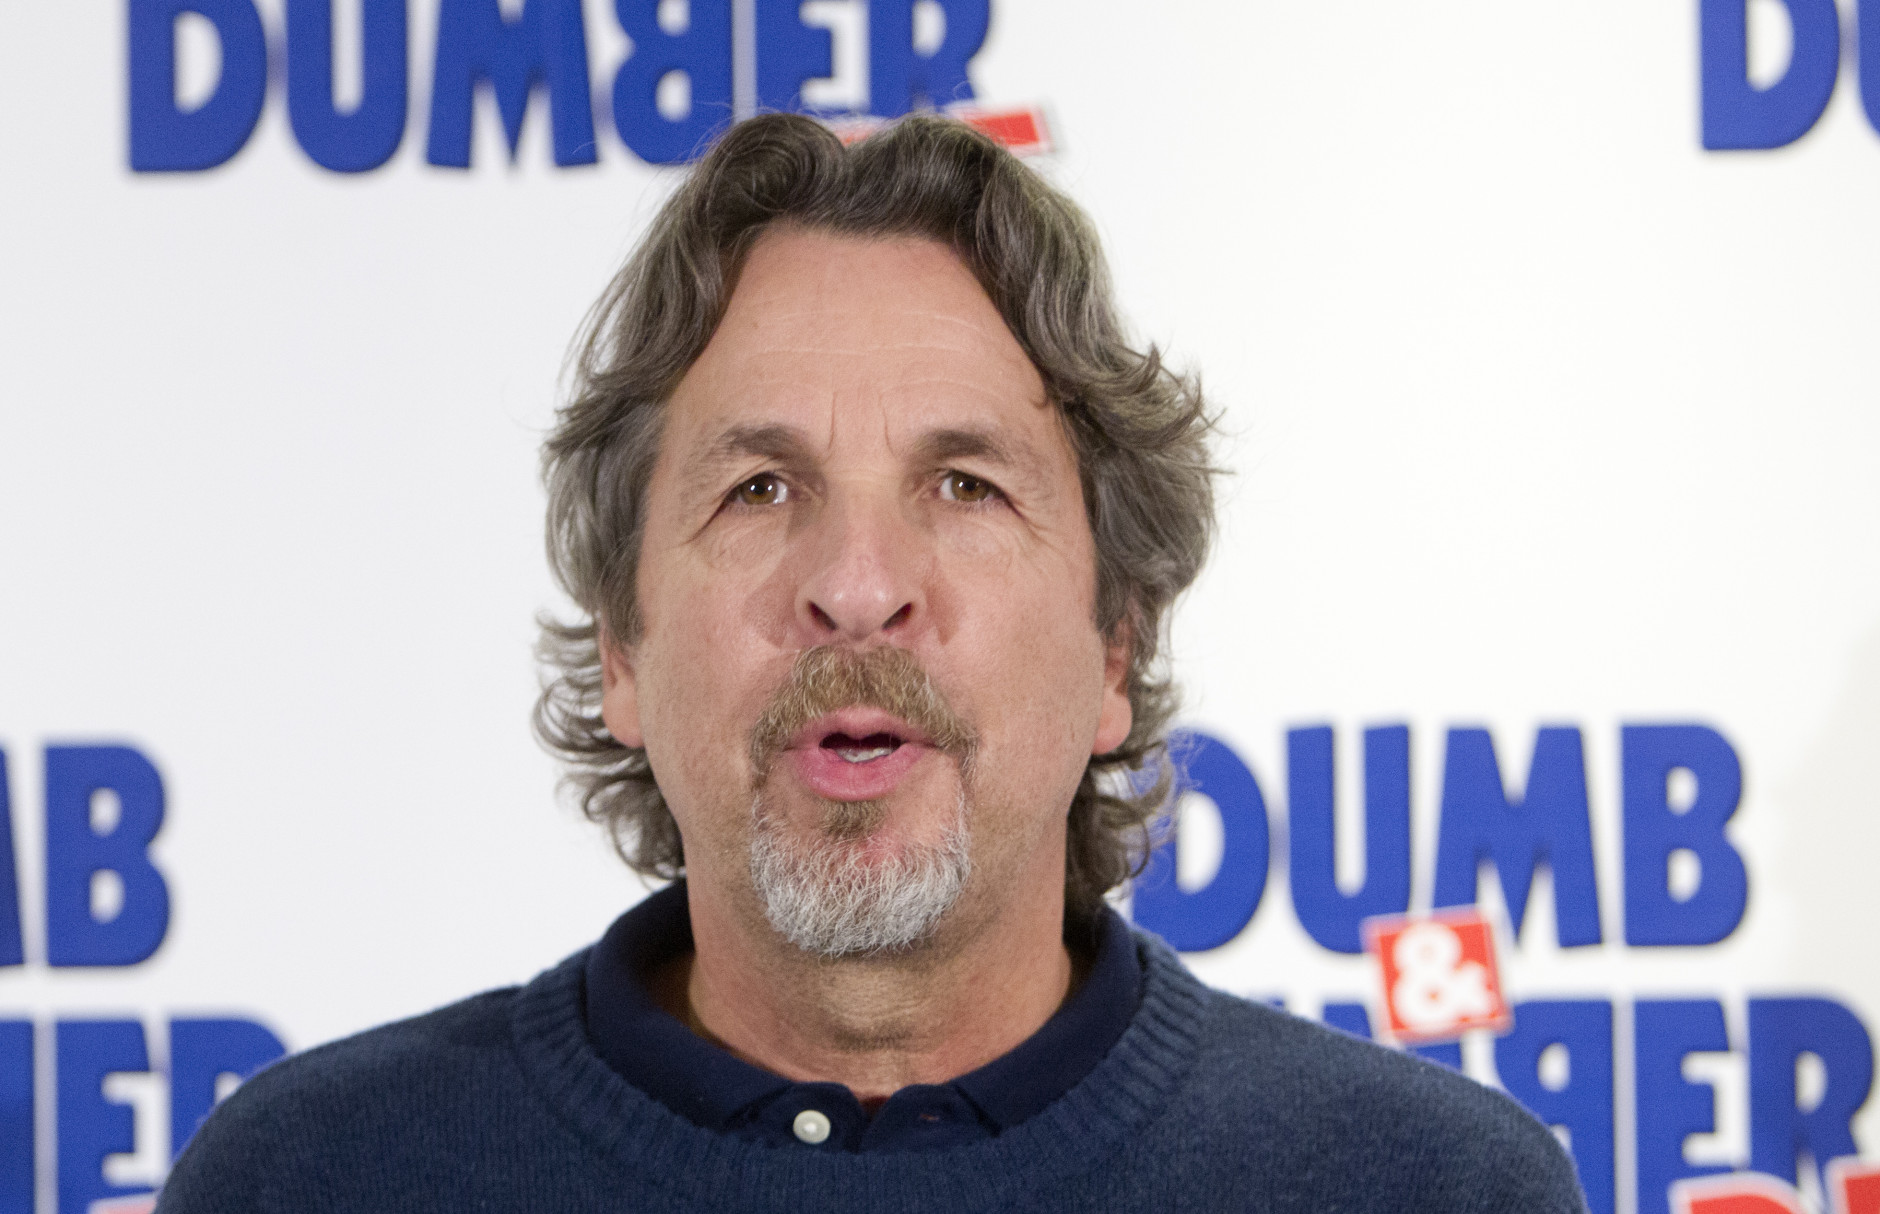 Director  Peter Farrelly poses  for photographers for the Dumb and Dumber to Photo Call  in Paris, France. Tuesday, Nov. 20, 2014. (AP Photo/Jacques Brinon)